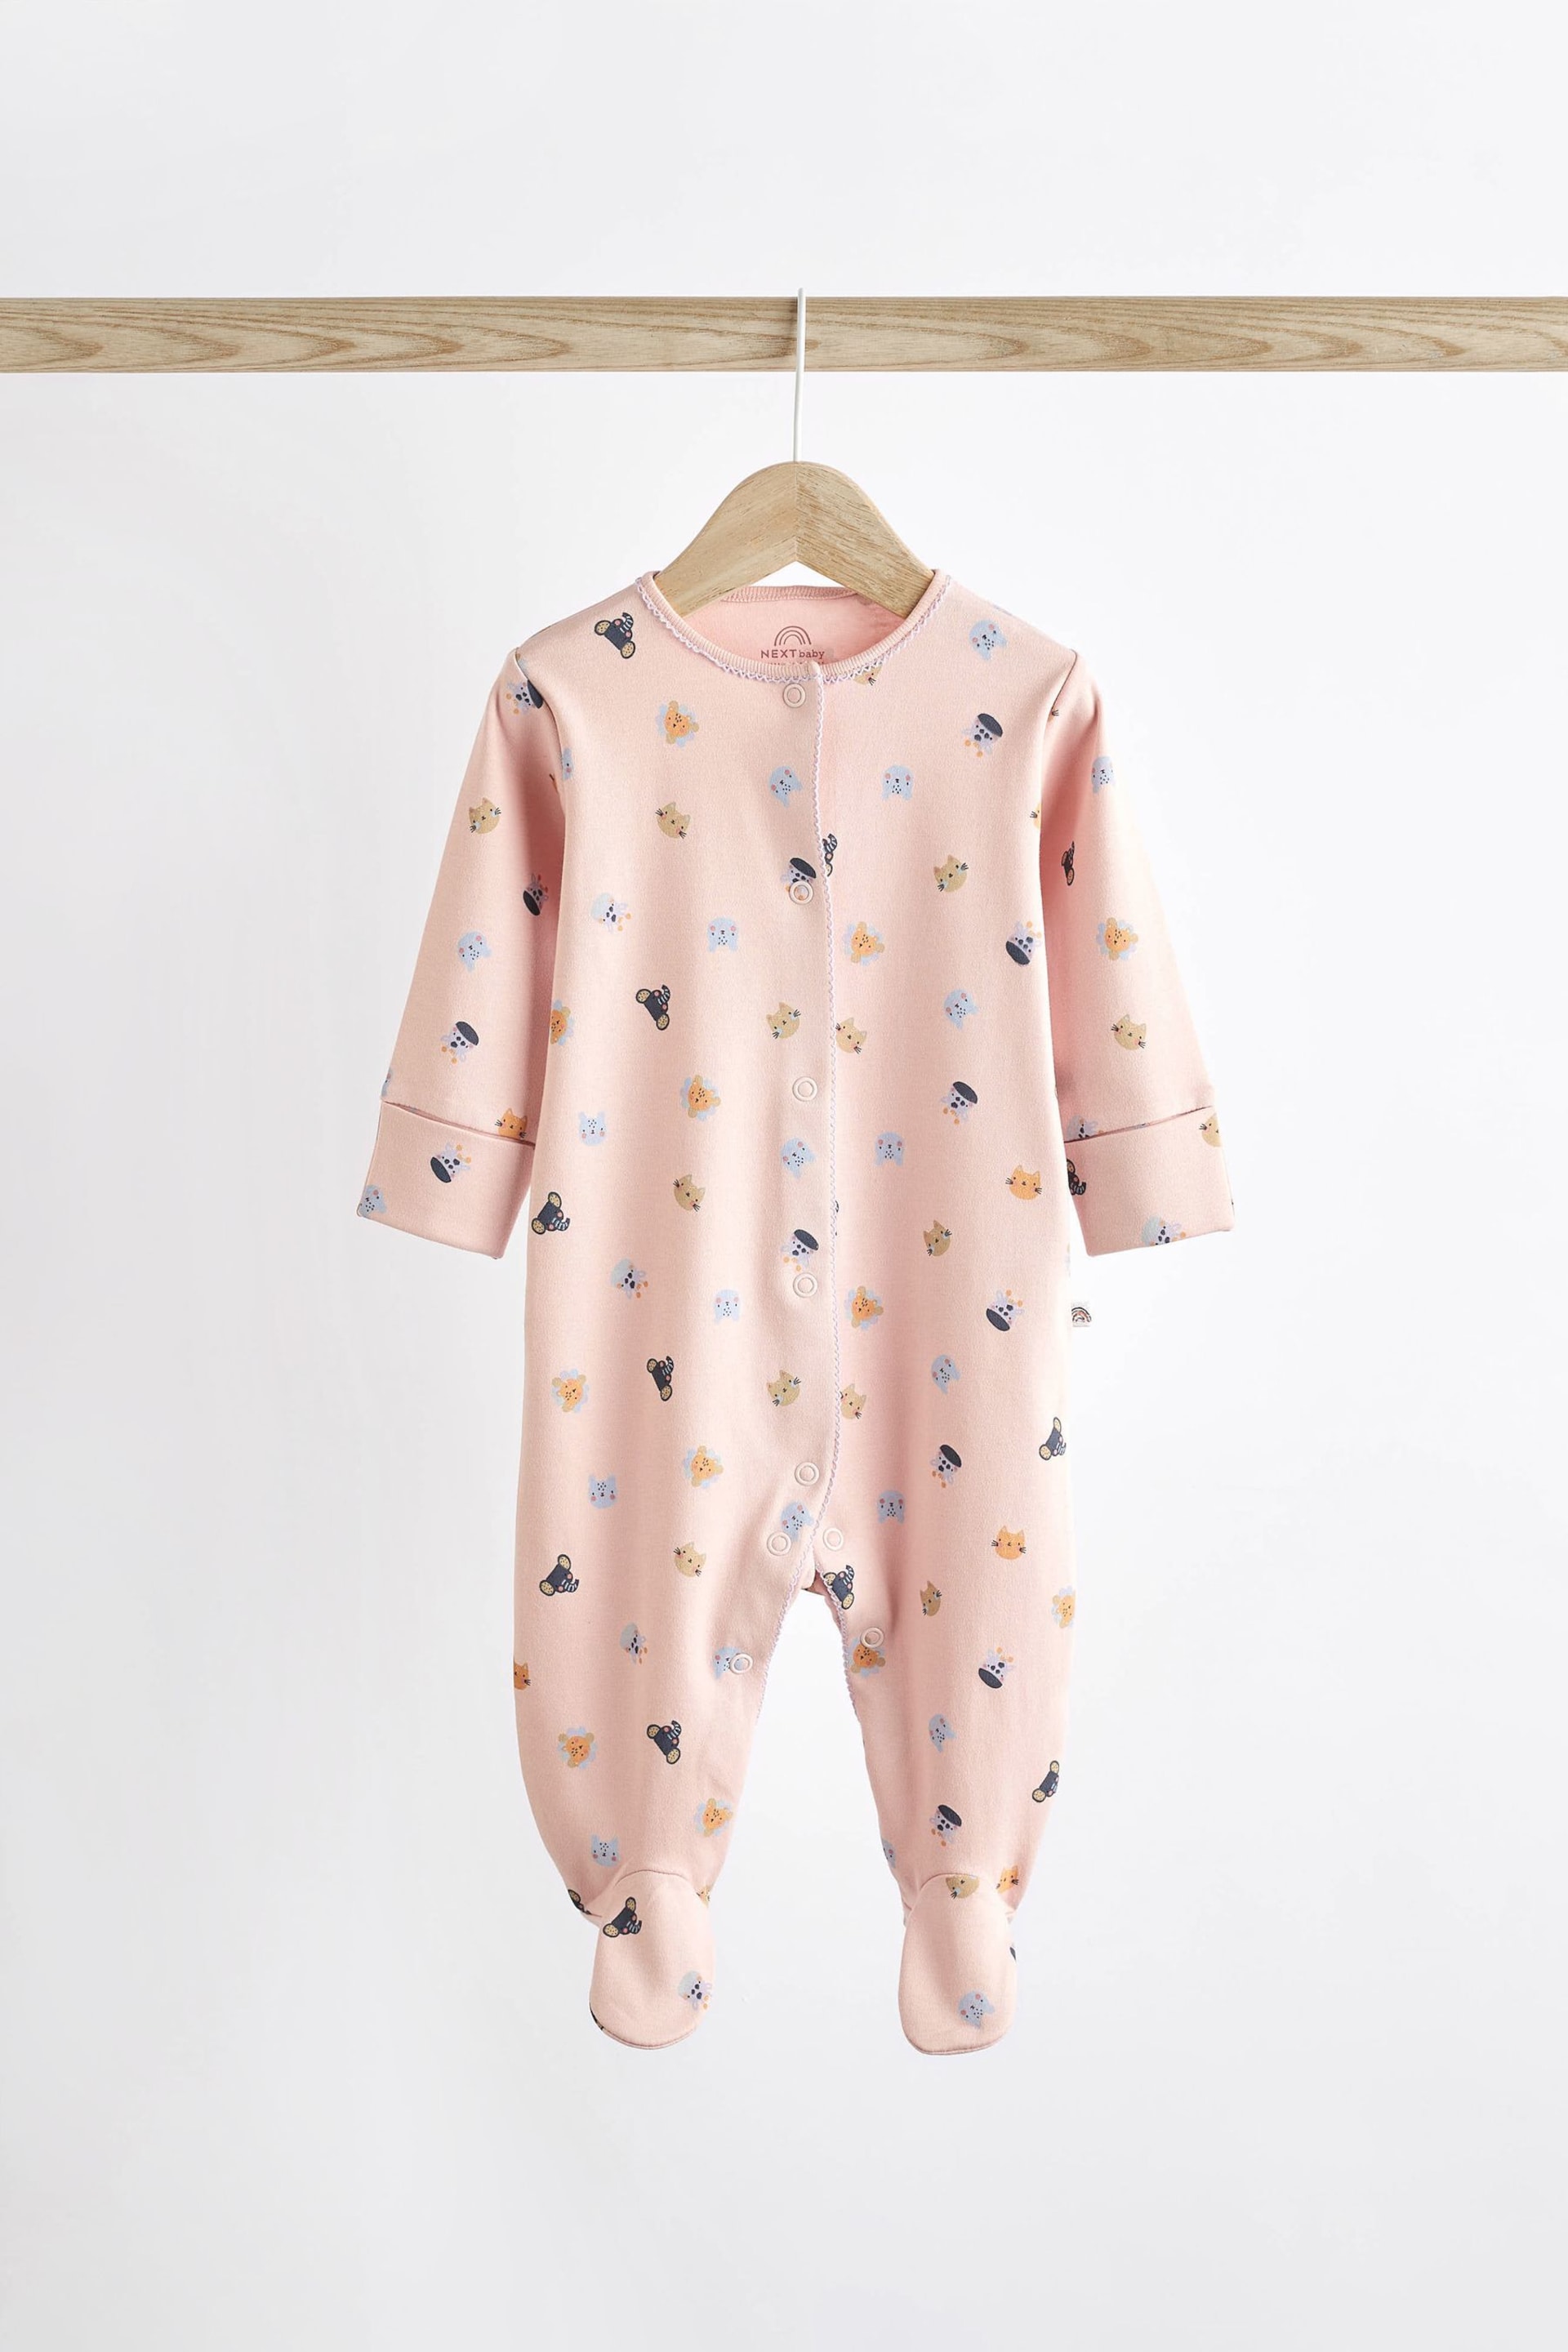 Multi Character Baby Footed Sleepsuits 5 Pack (0-2yrs) - Image 7 of 14